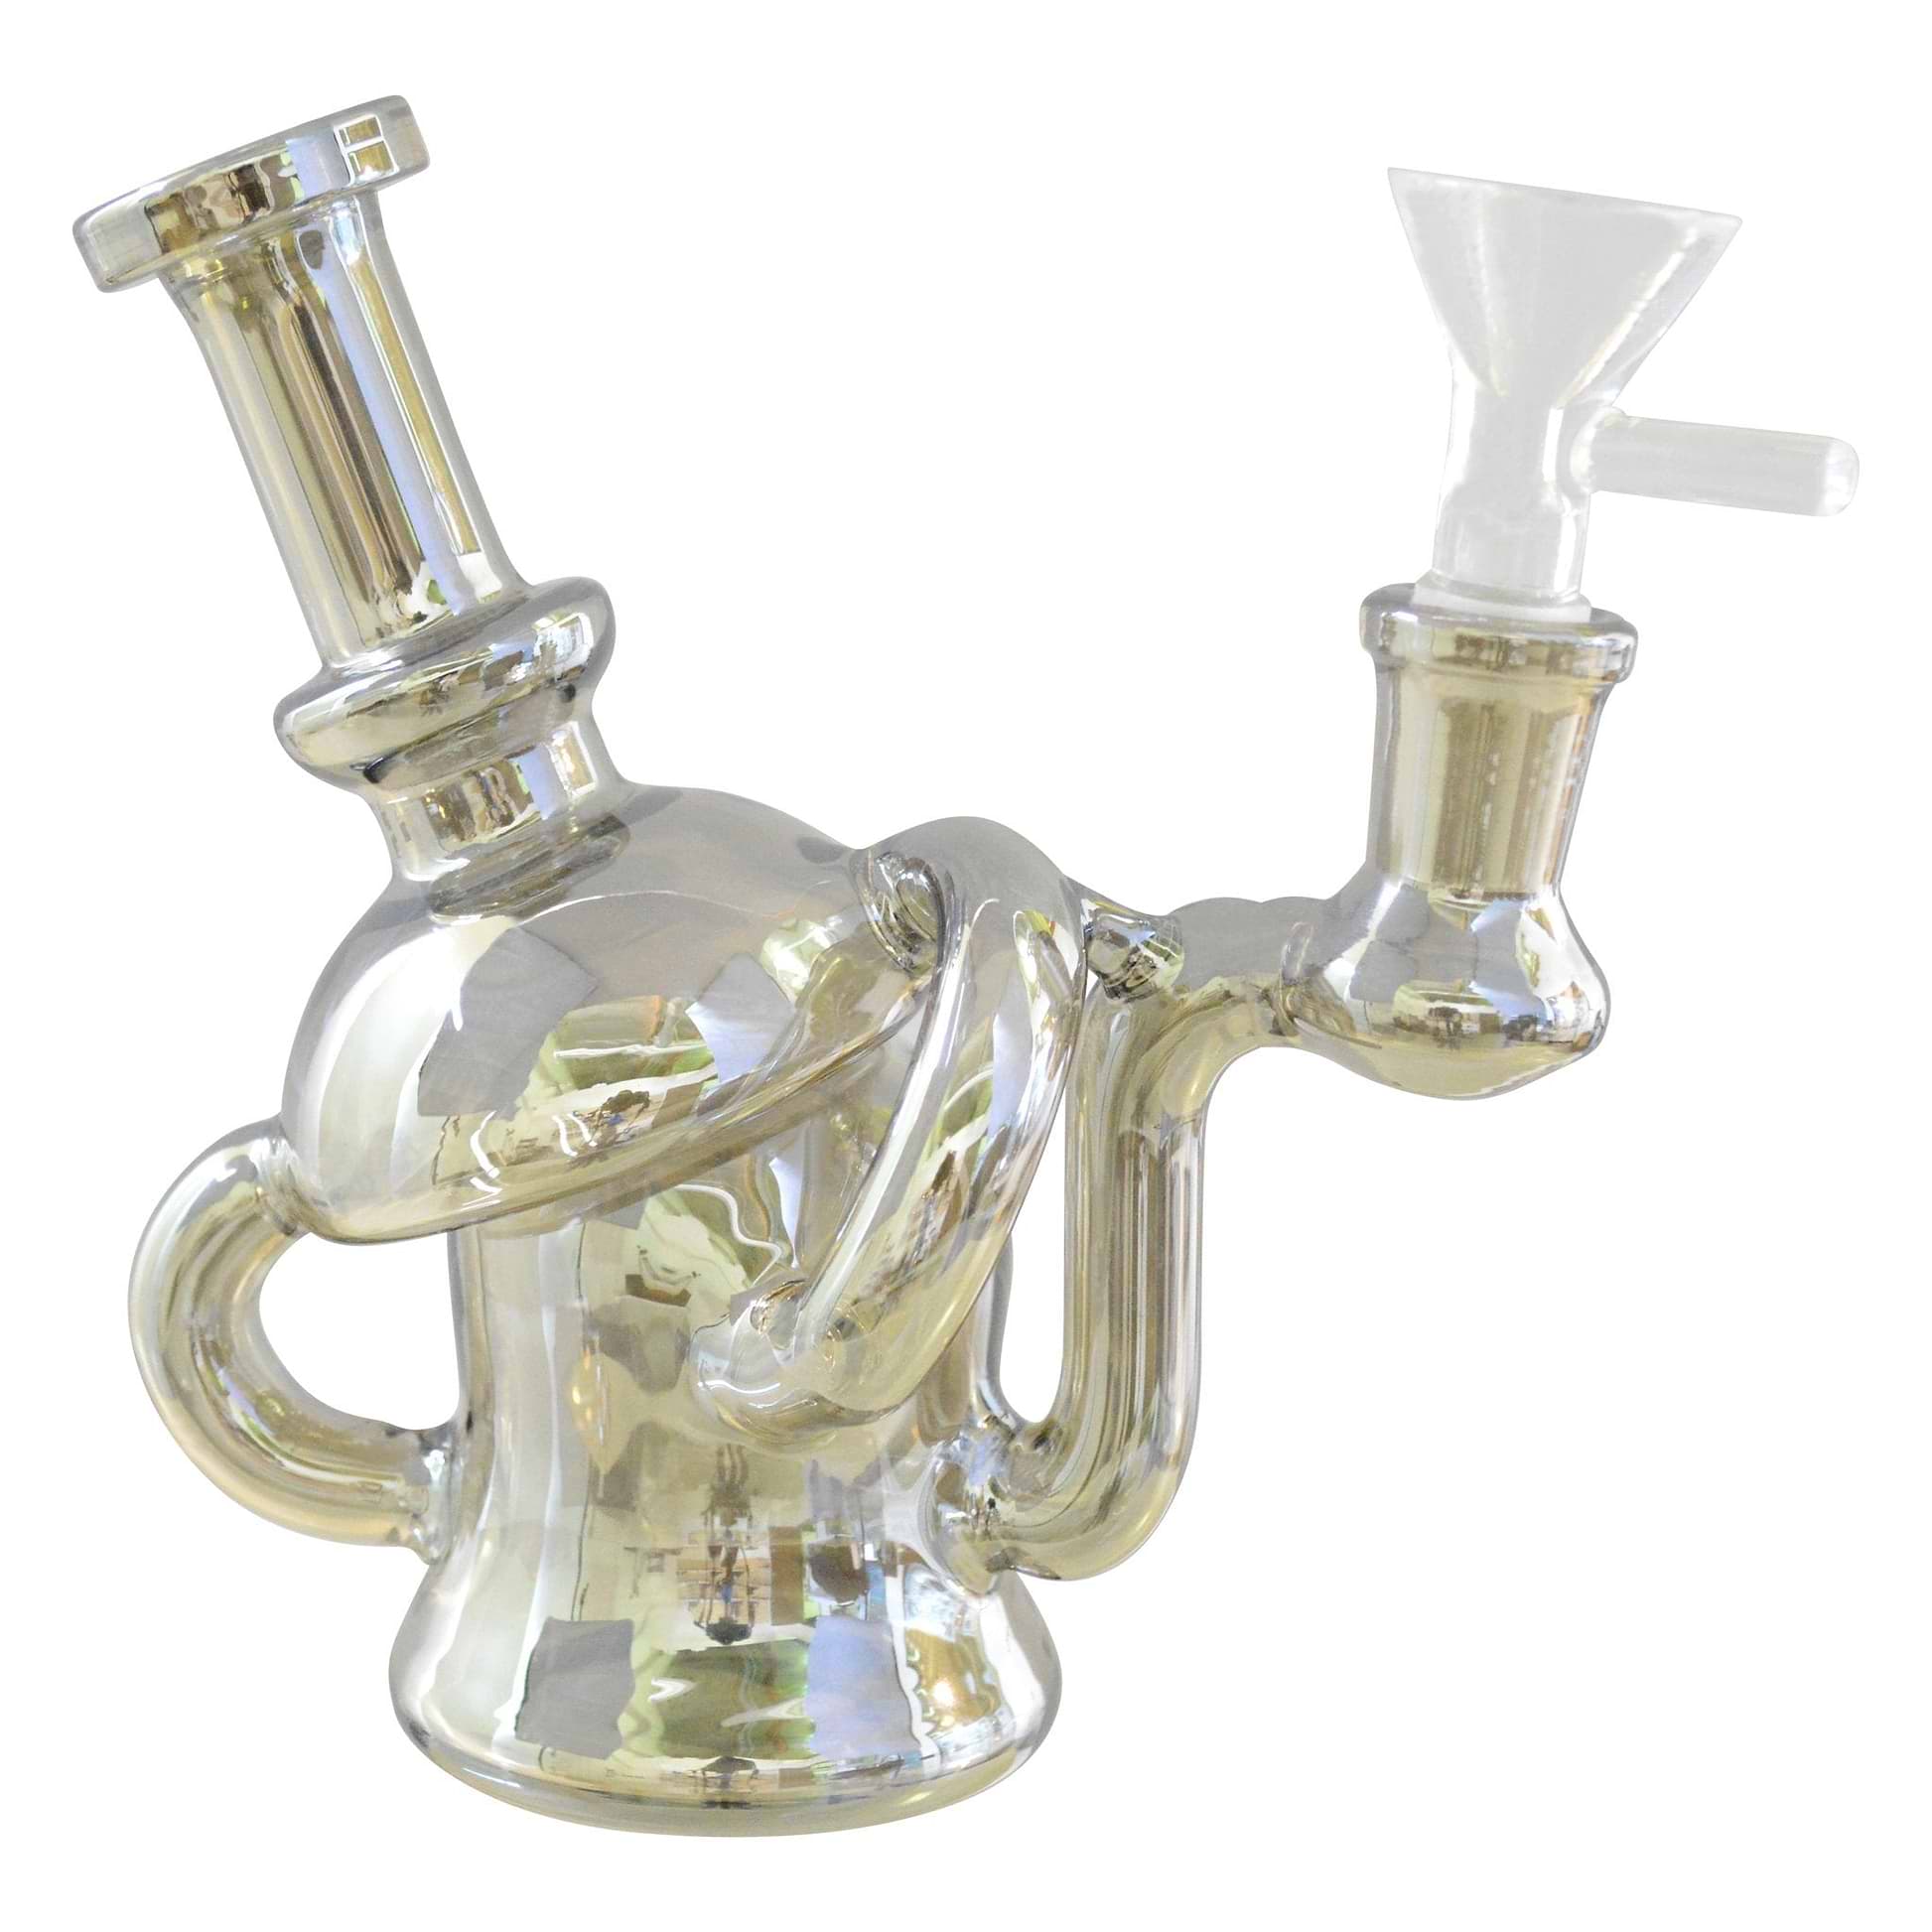 Full body shot of 6-inch glass multichambered bong smoking device mouthpiece facing left in chrome color